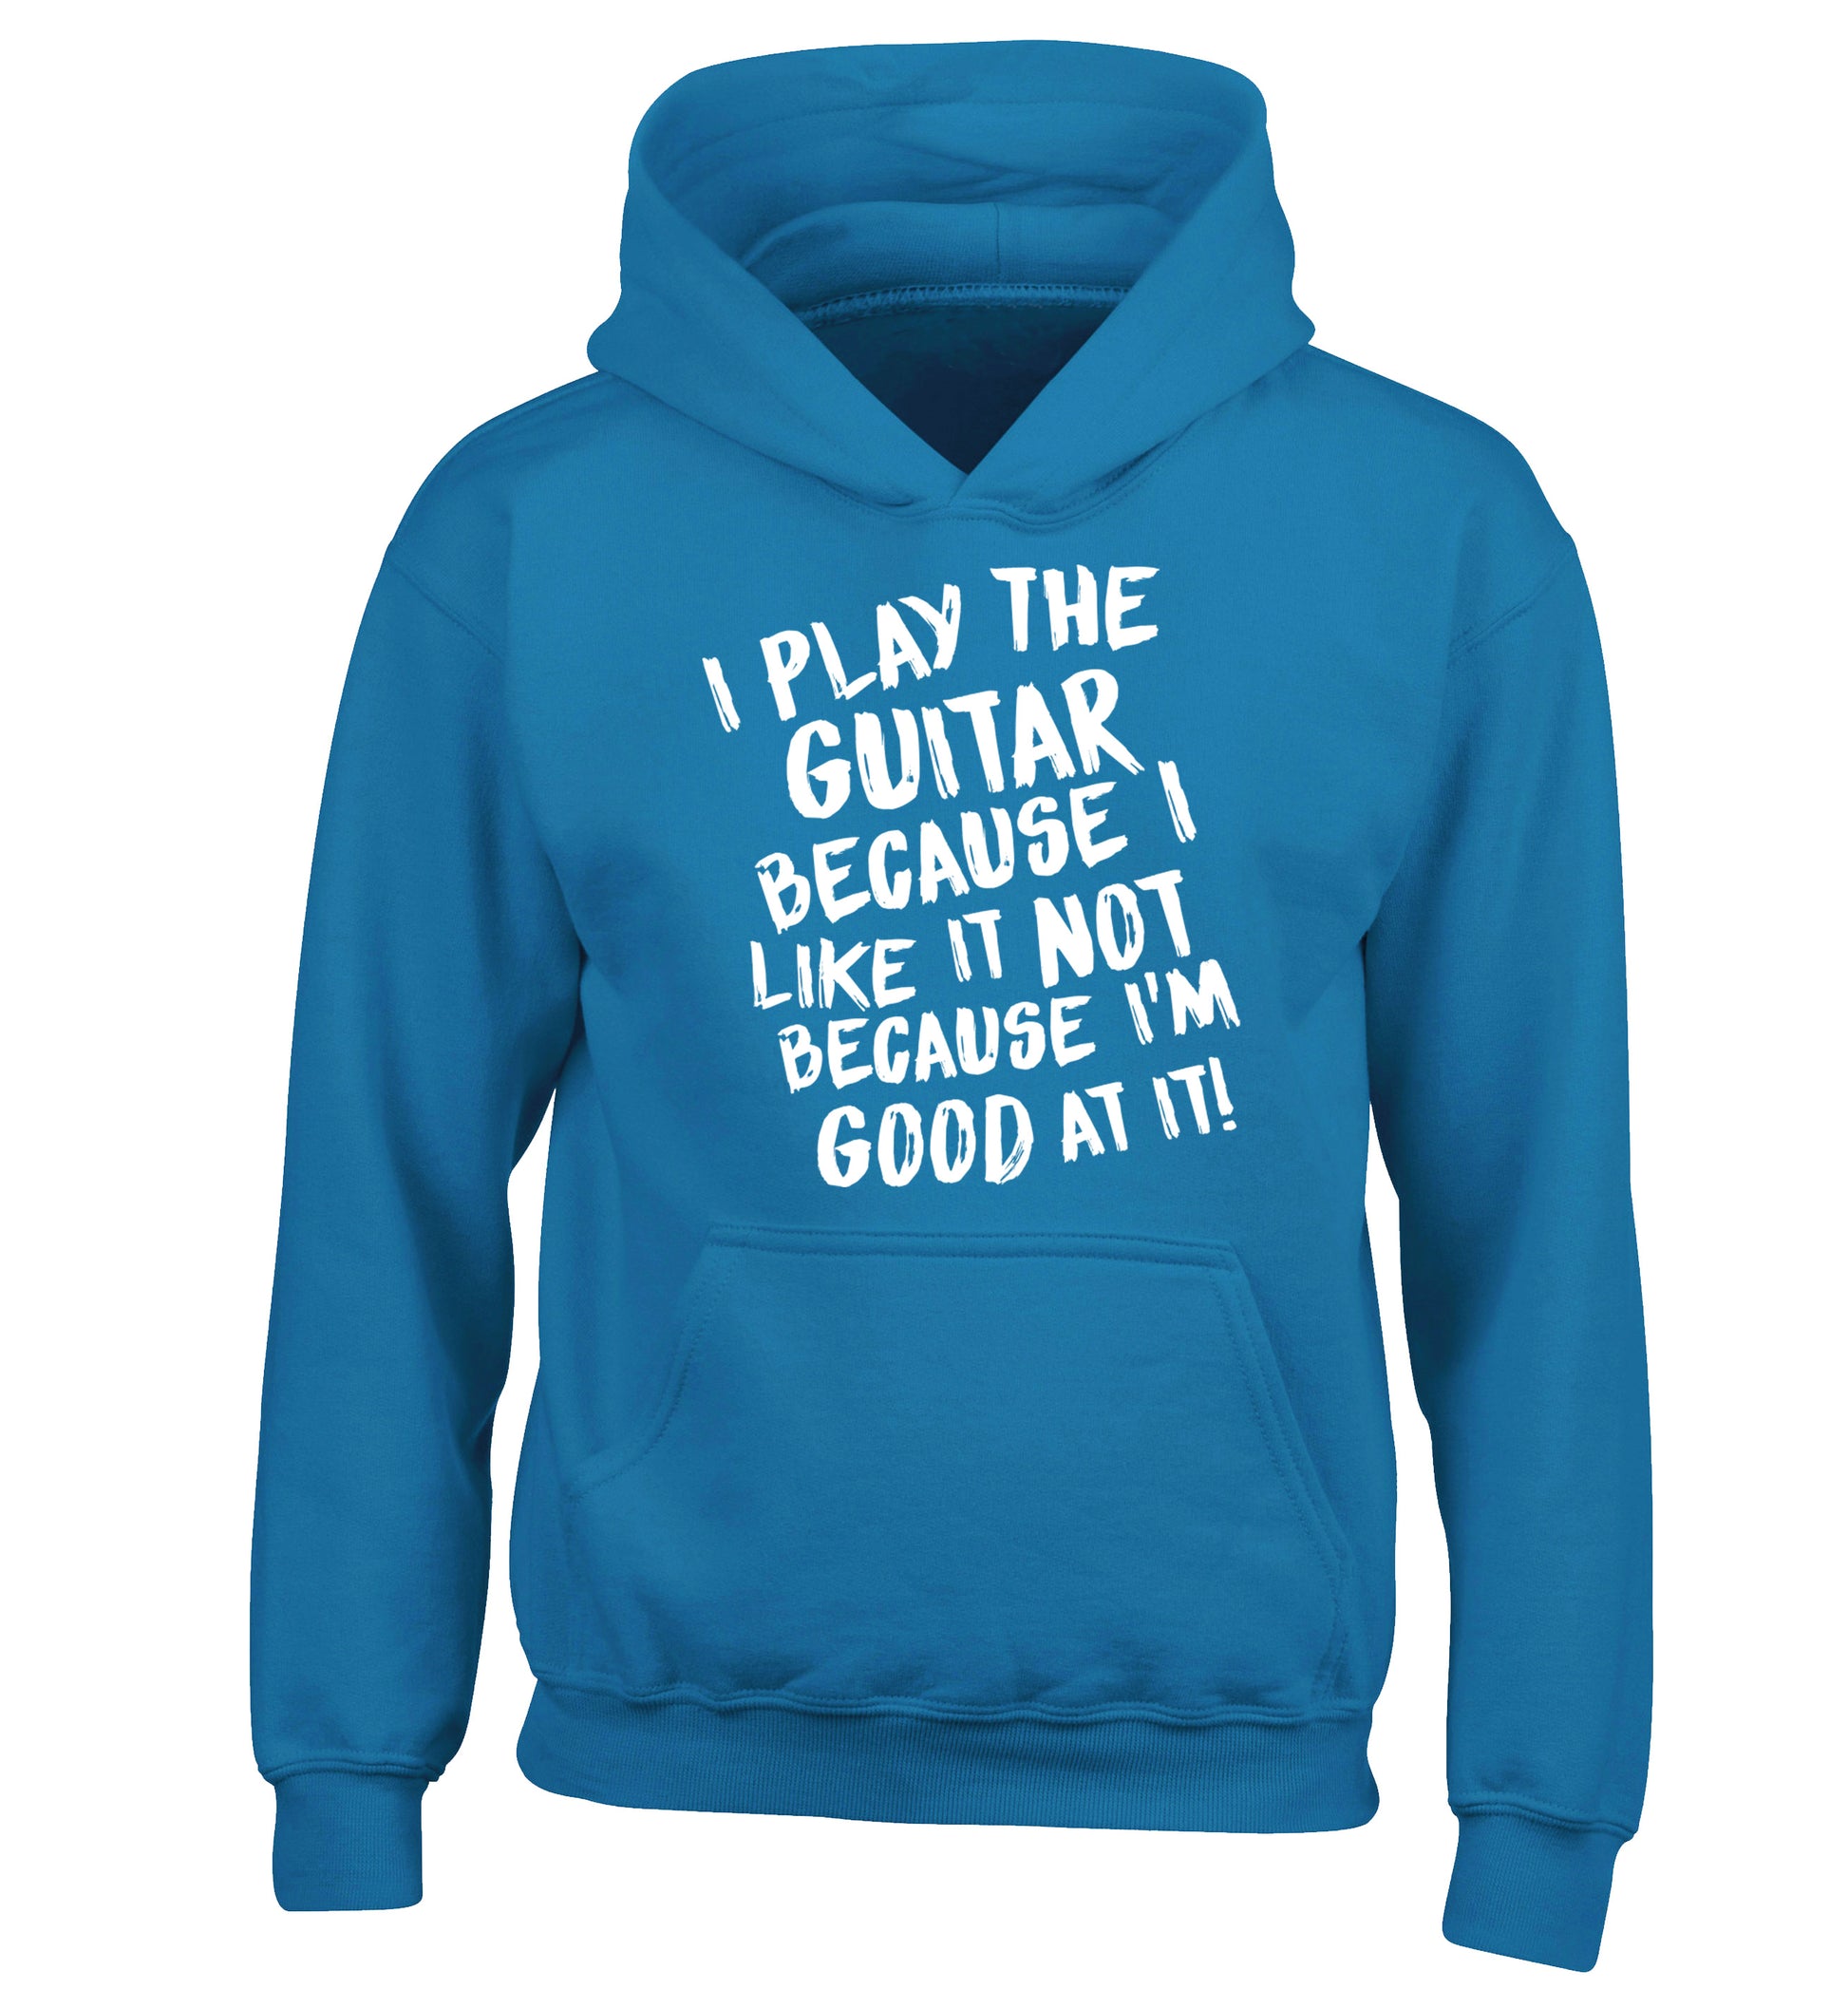 I play the guitar because I like it not because I'm good at it children's blue hoodie 12-14 Years